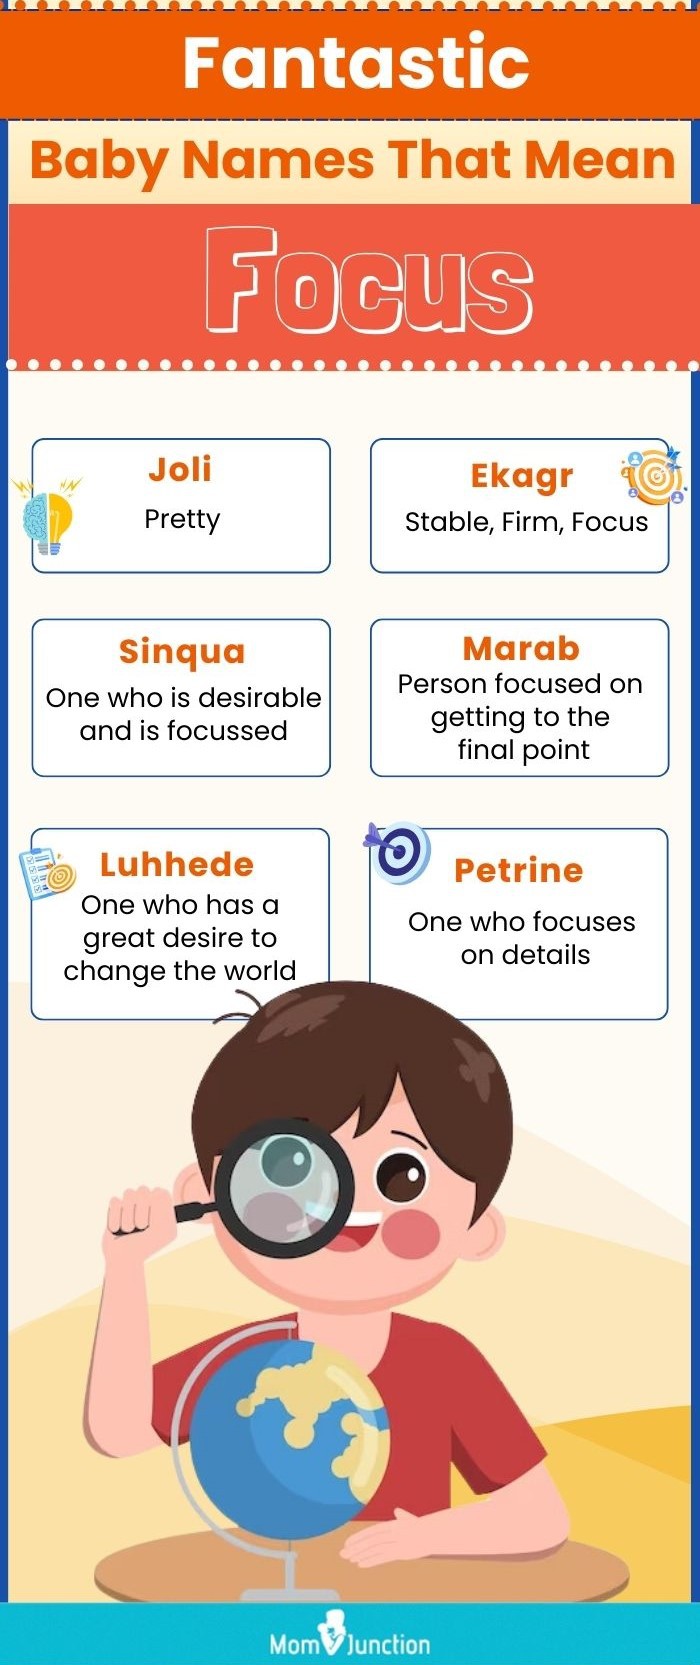 c fantastic baby names that mean focus (infographic)